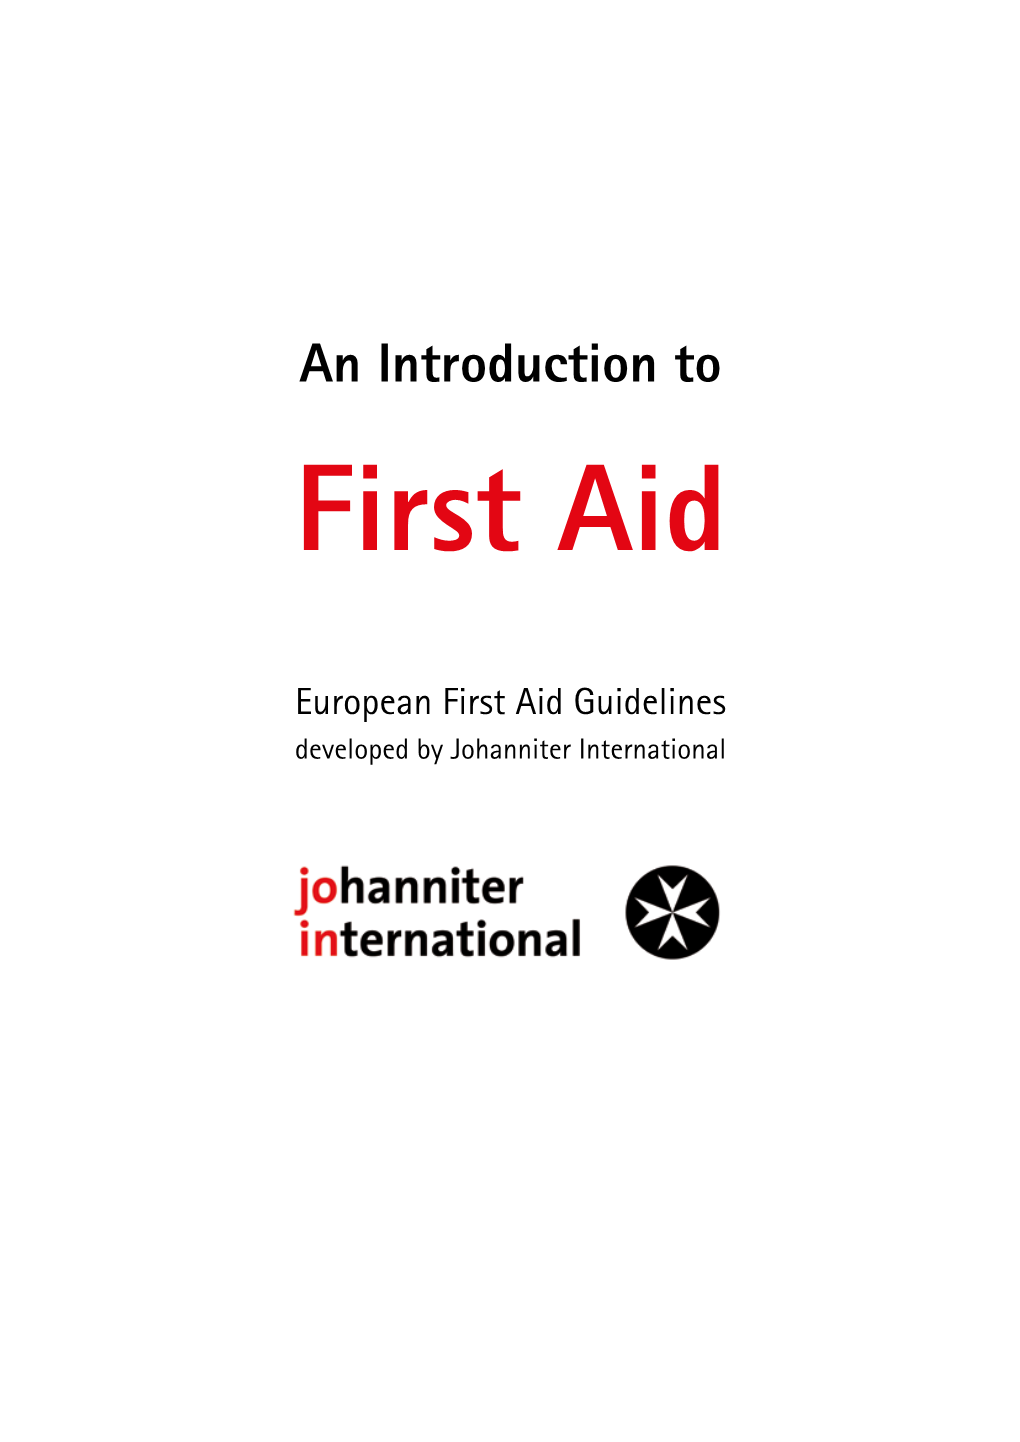 An Introduction to First Aid